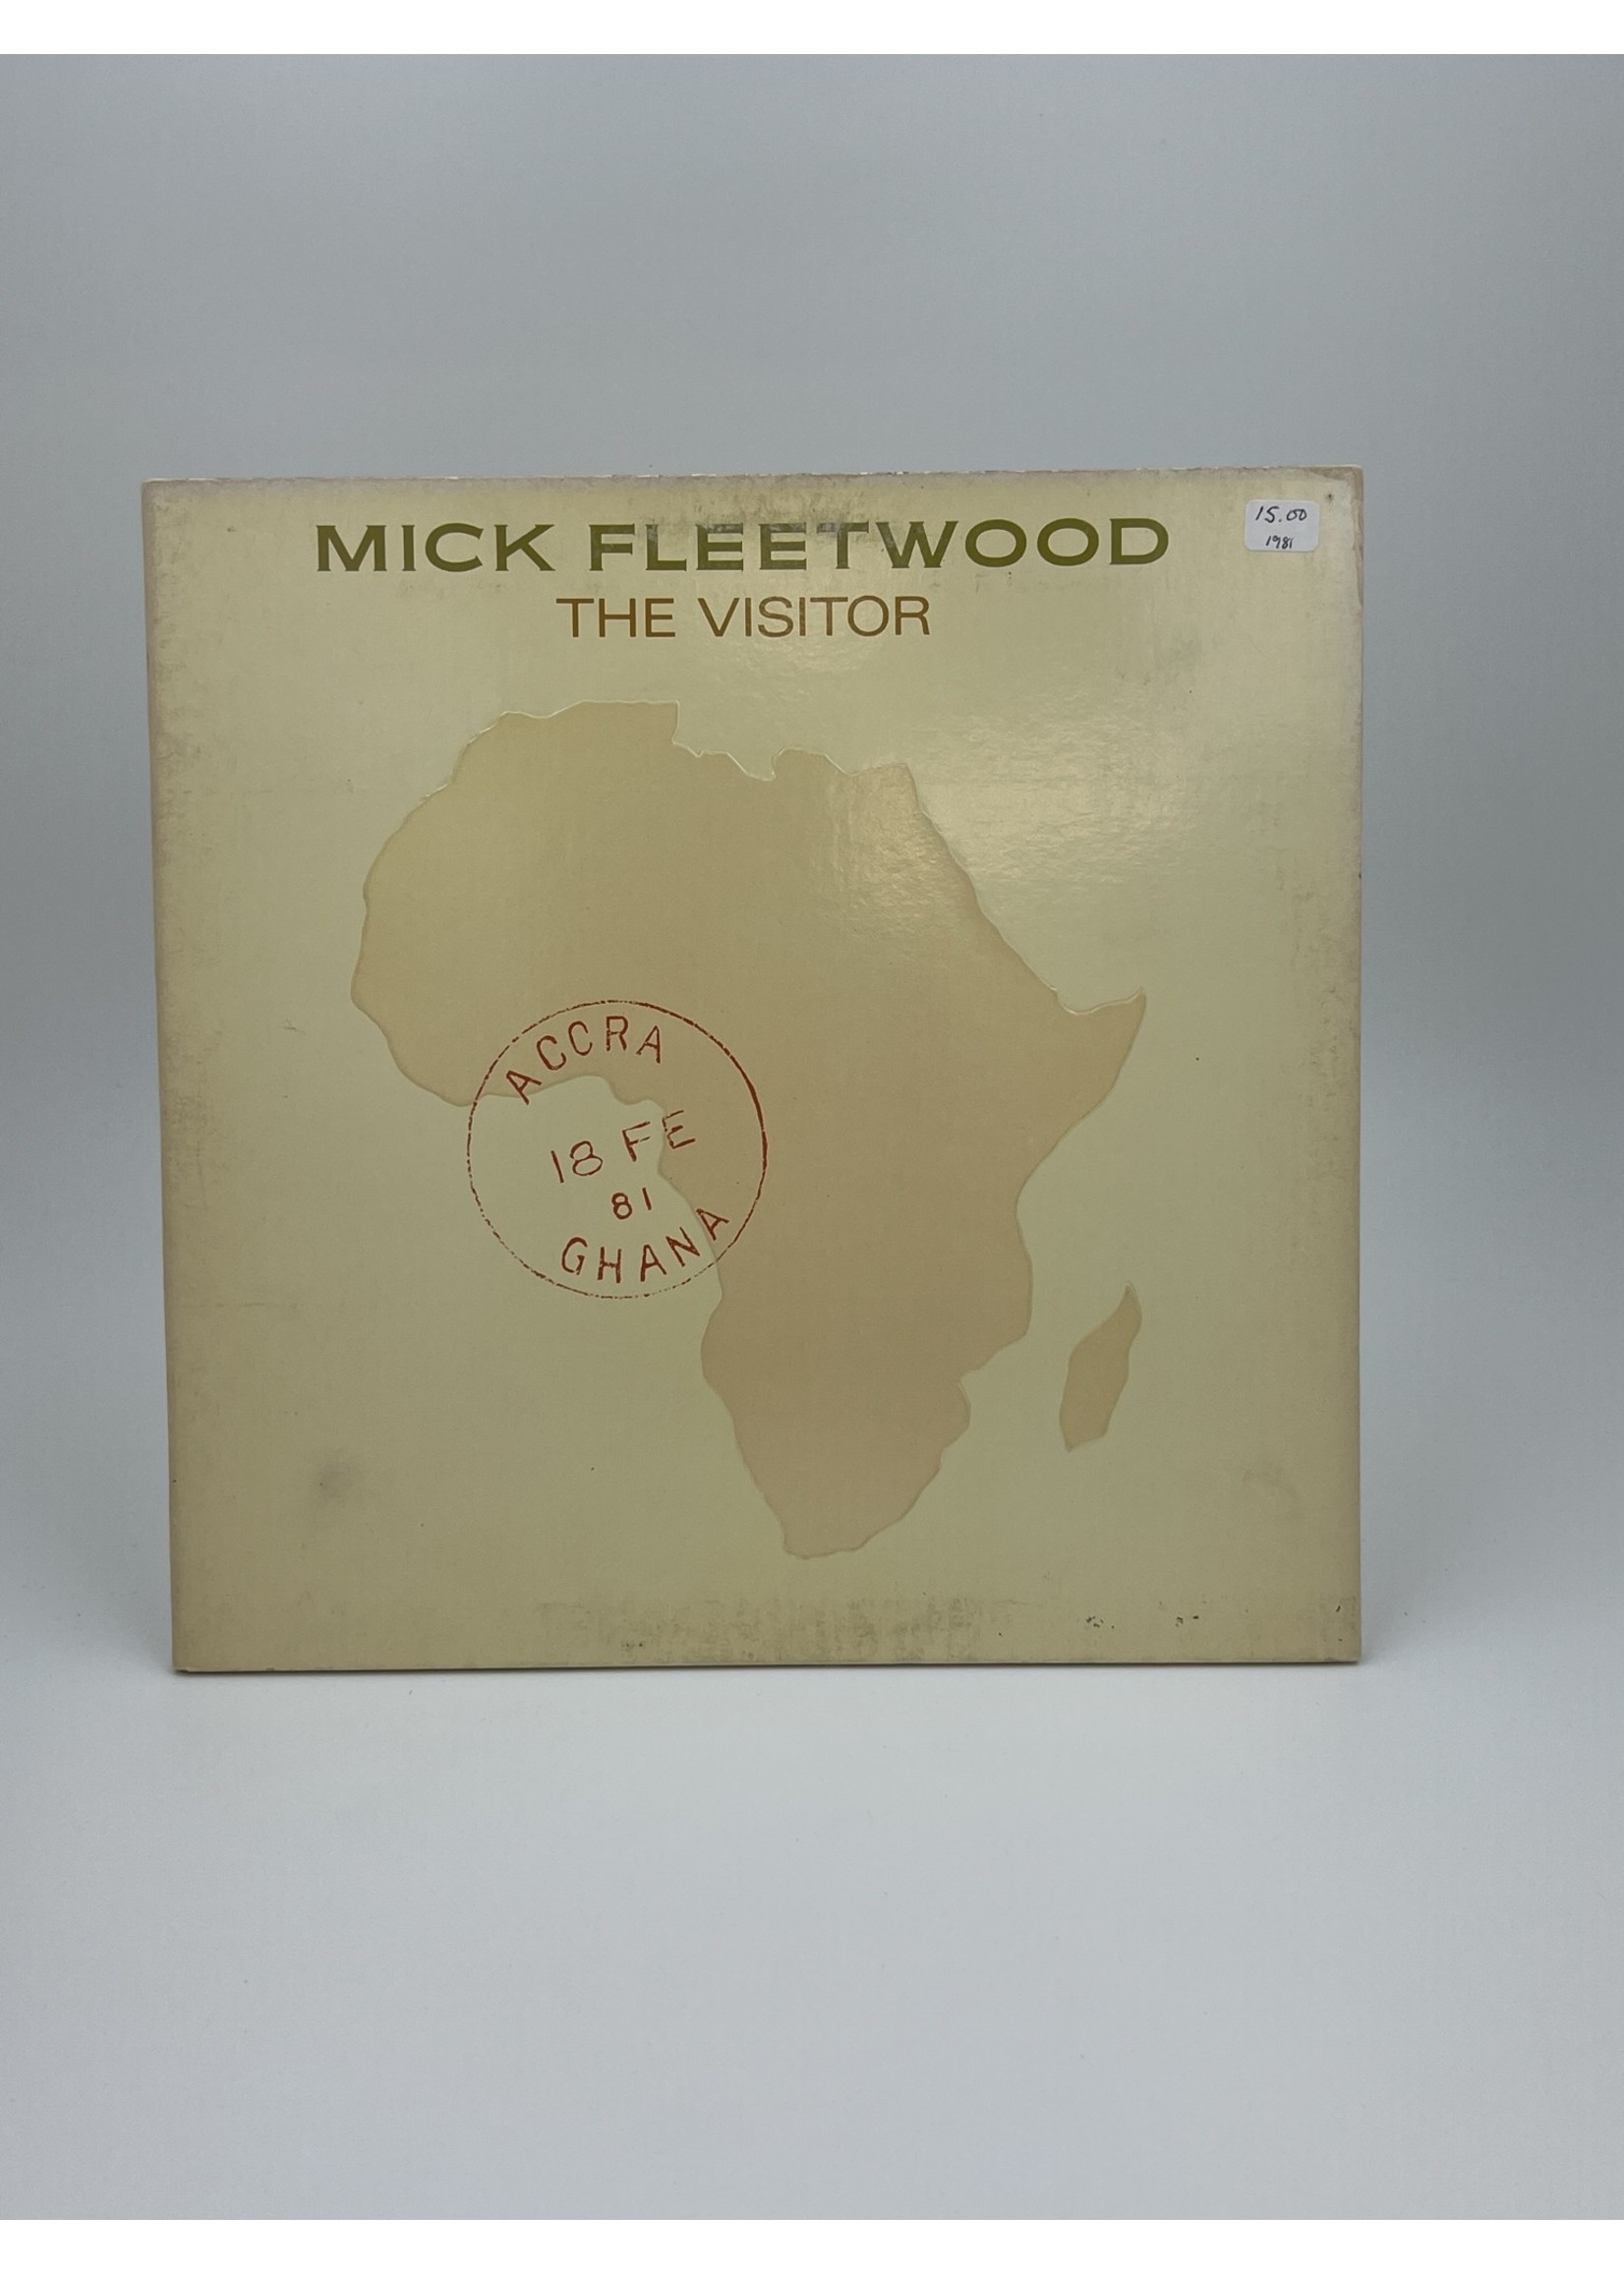 LP Mick Fleetwood The Visitor LP Record